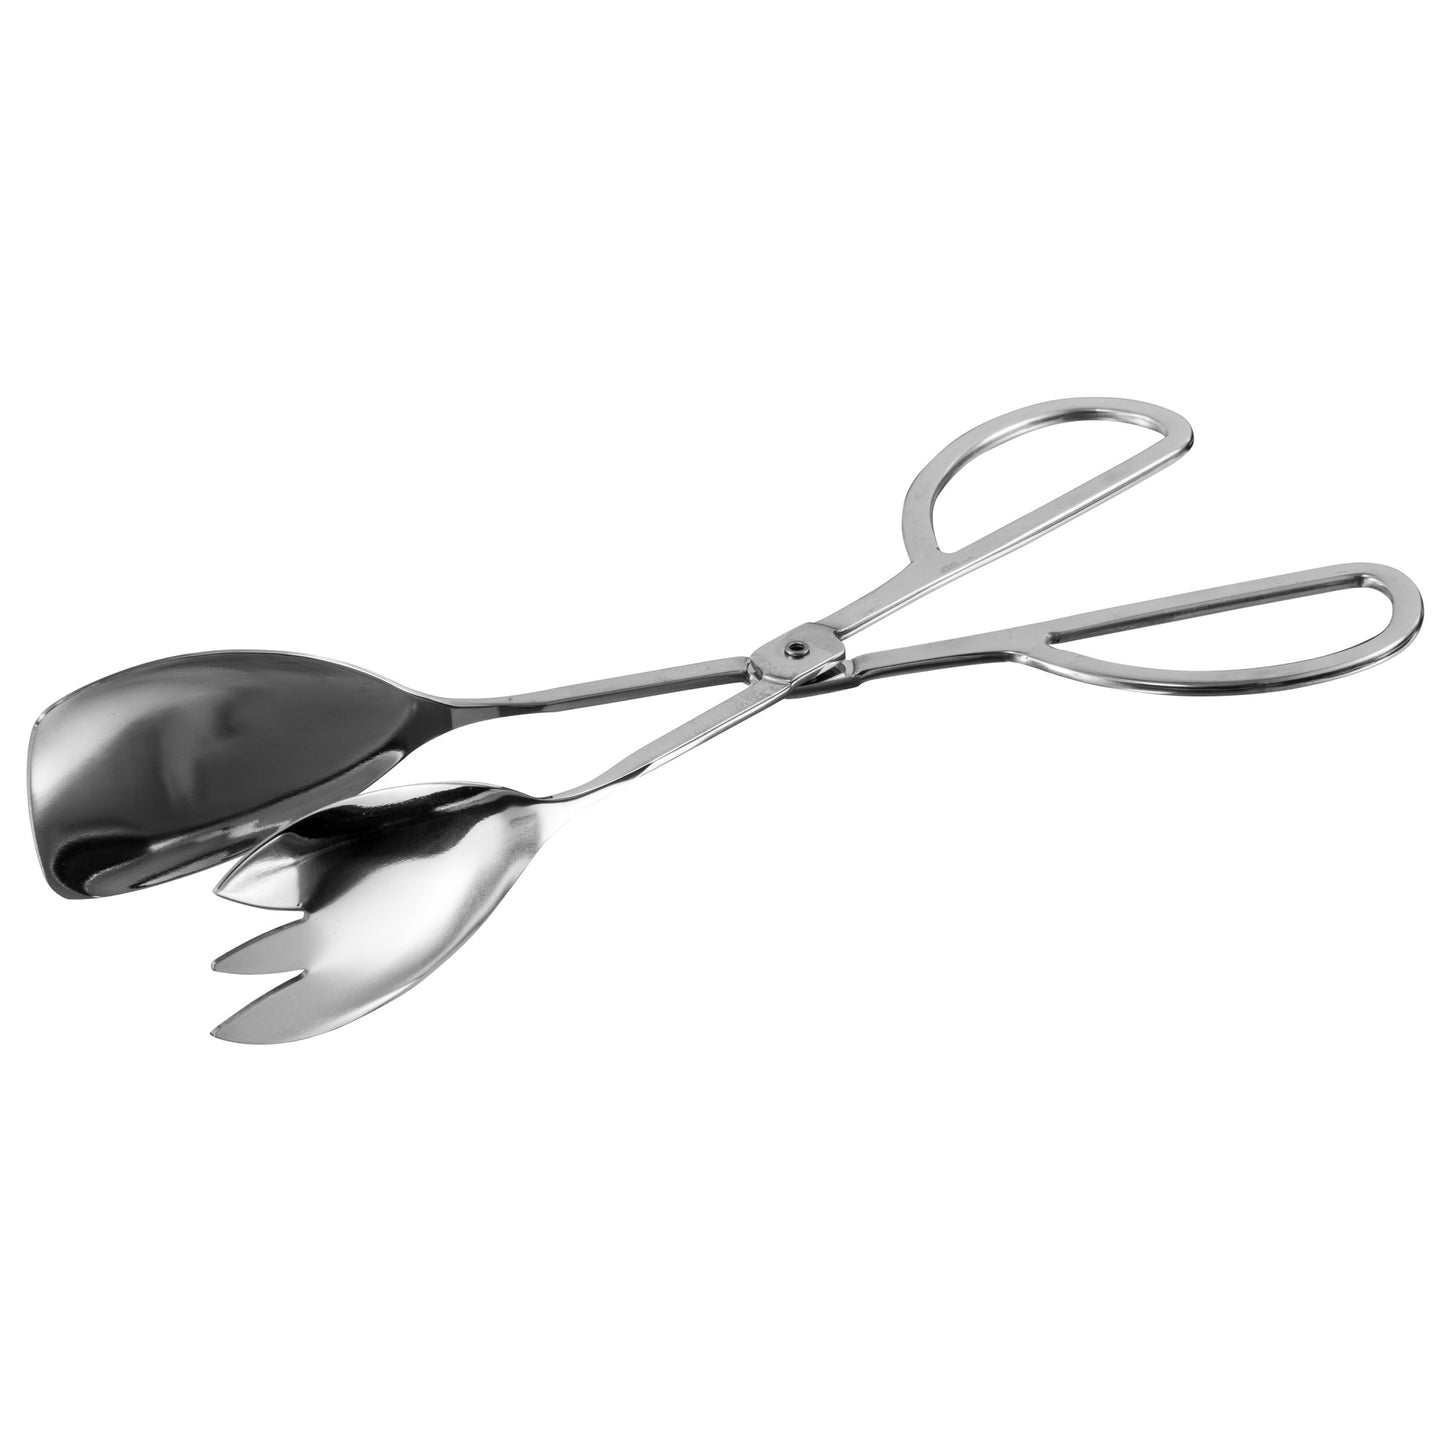 ST-105SF - 10-1/2" Stainless Steel Spatula and Fork Salad Tongs, Mirror Finish